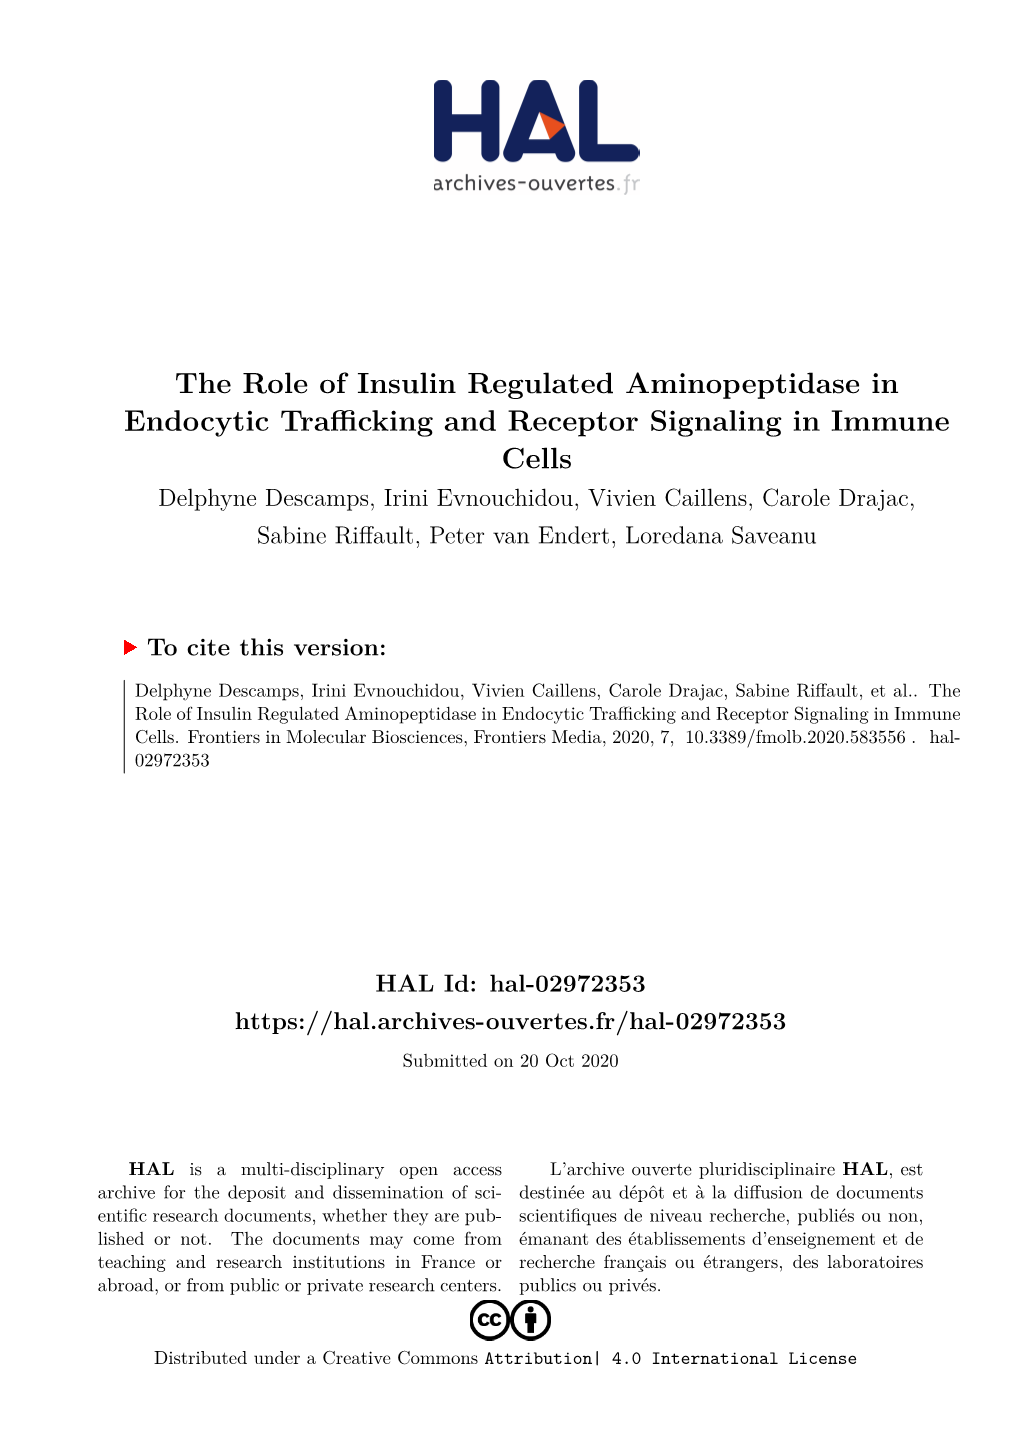 The Role of Insulin Regulated Aminopeptidase in Endocytic